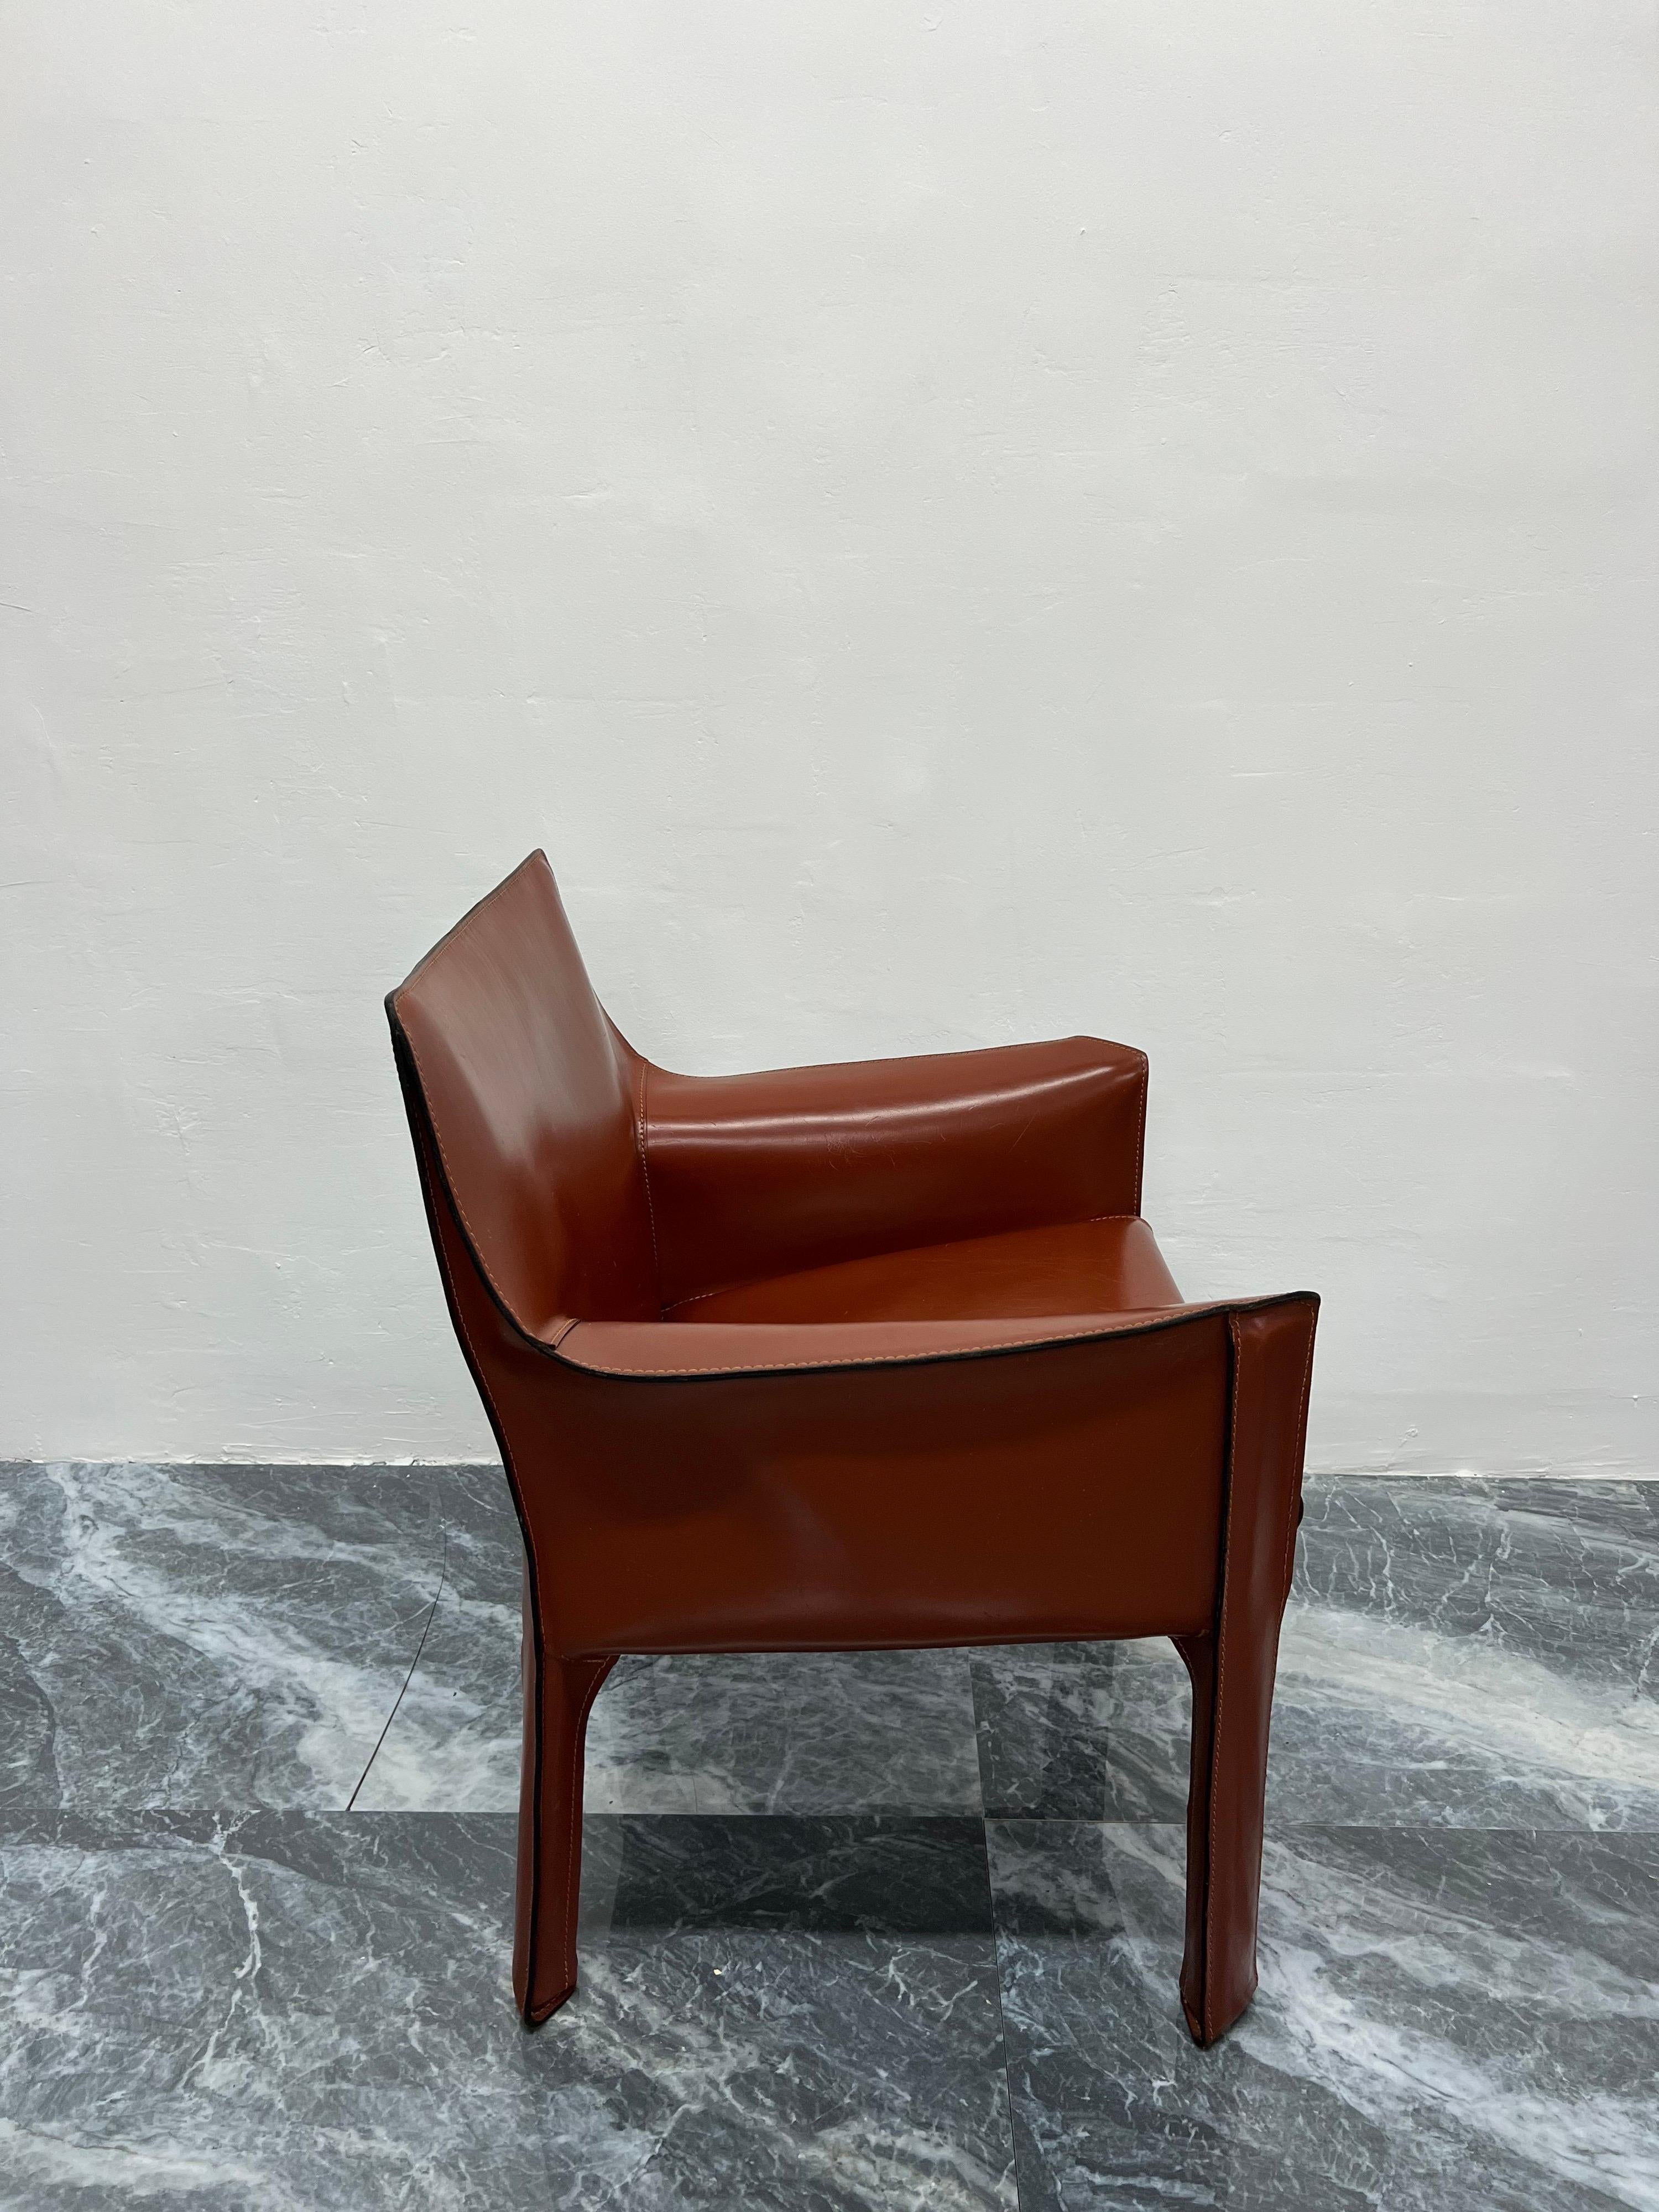 Italian Mario Bellini Cab Leather Lounge Chairs for Cassina, a Pair